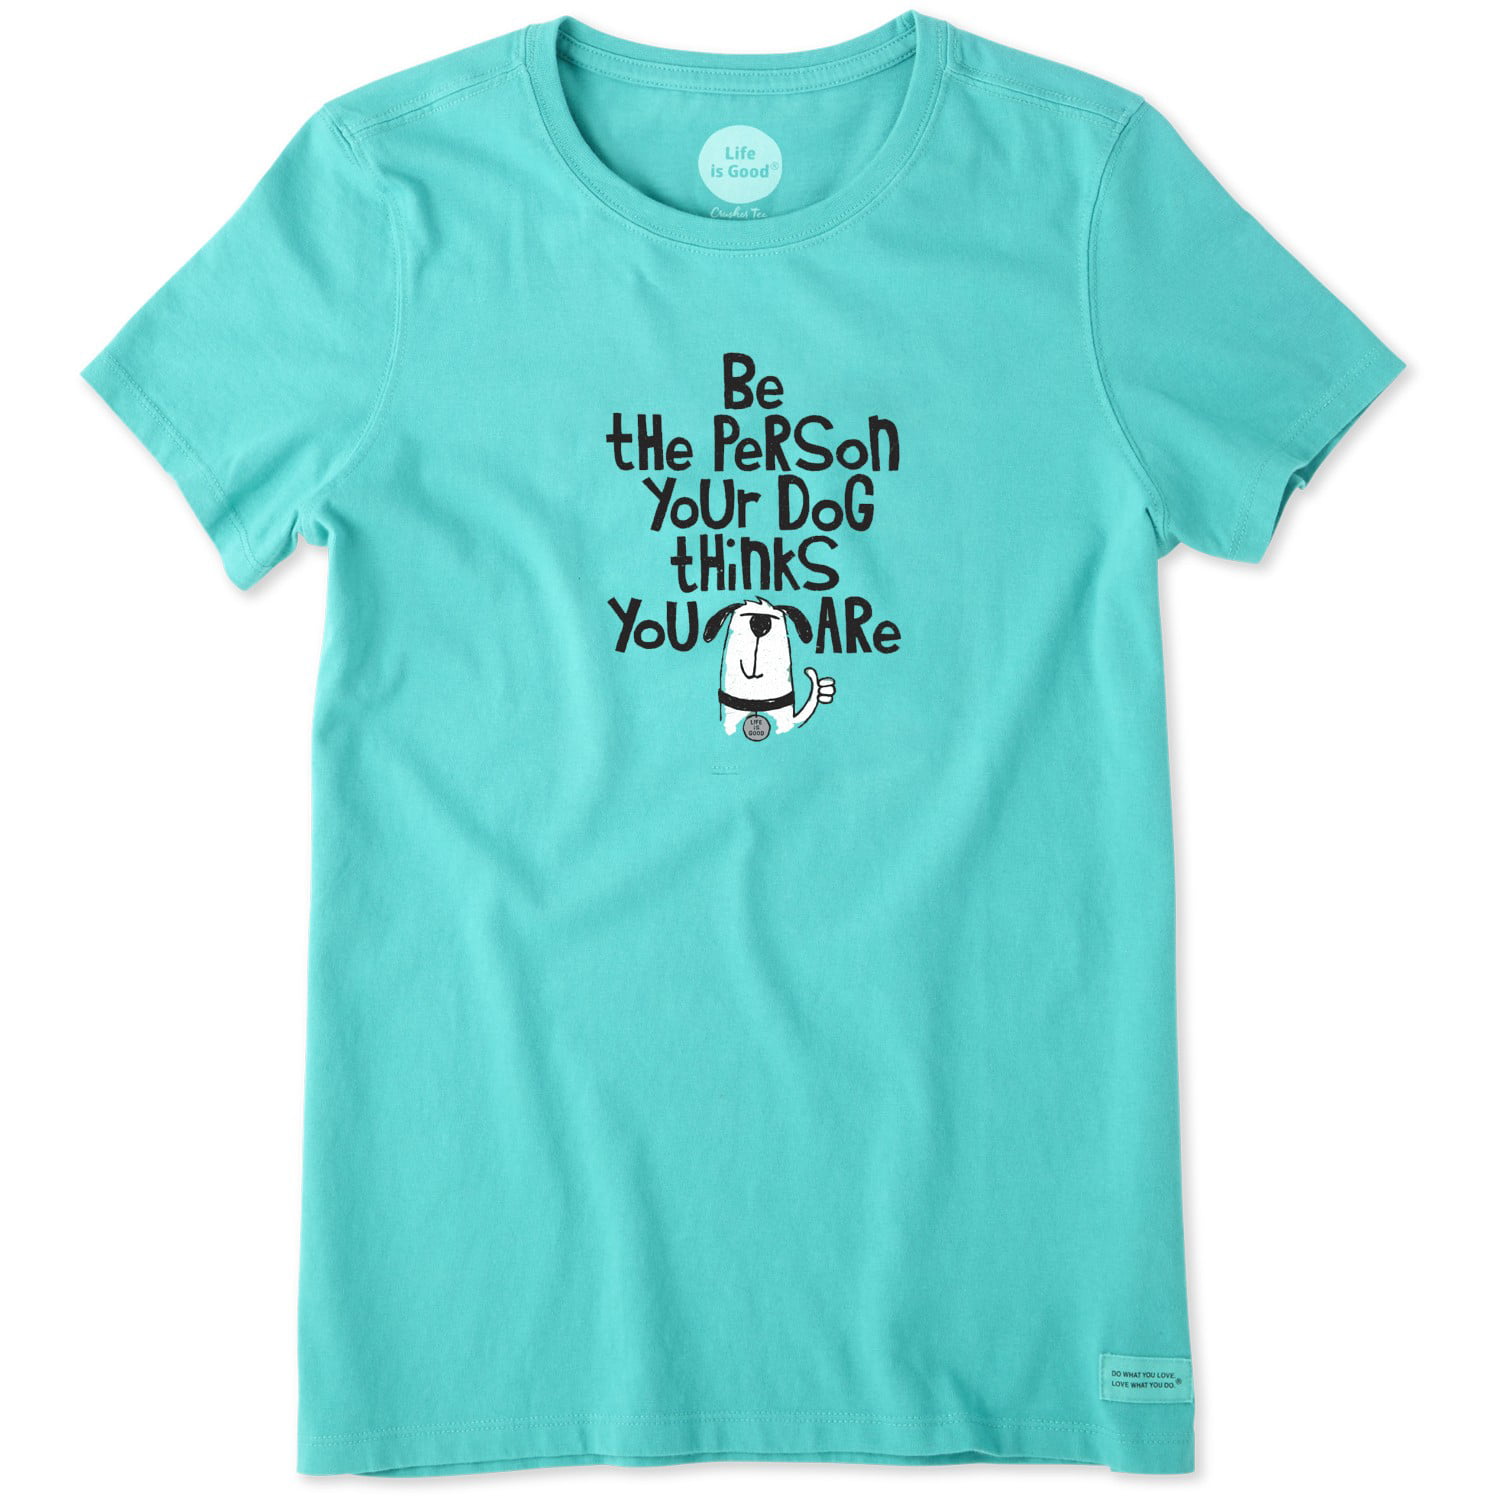 Life is Good Womens Love is A Super Power Crusher T-Shirt